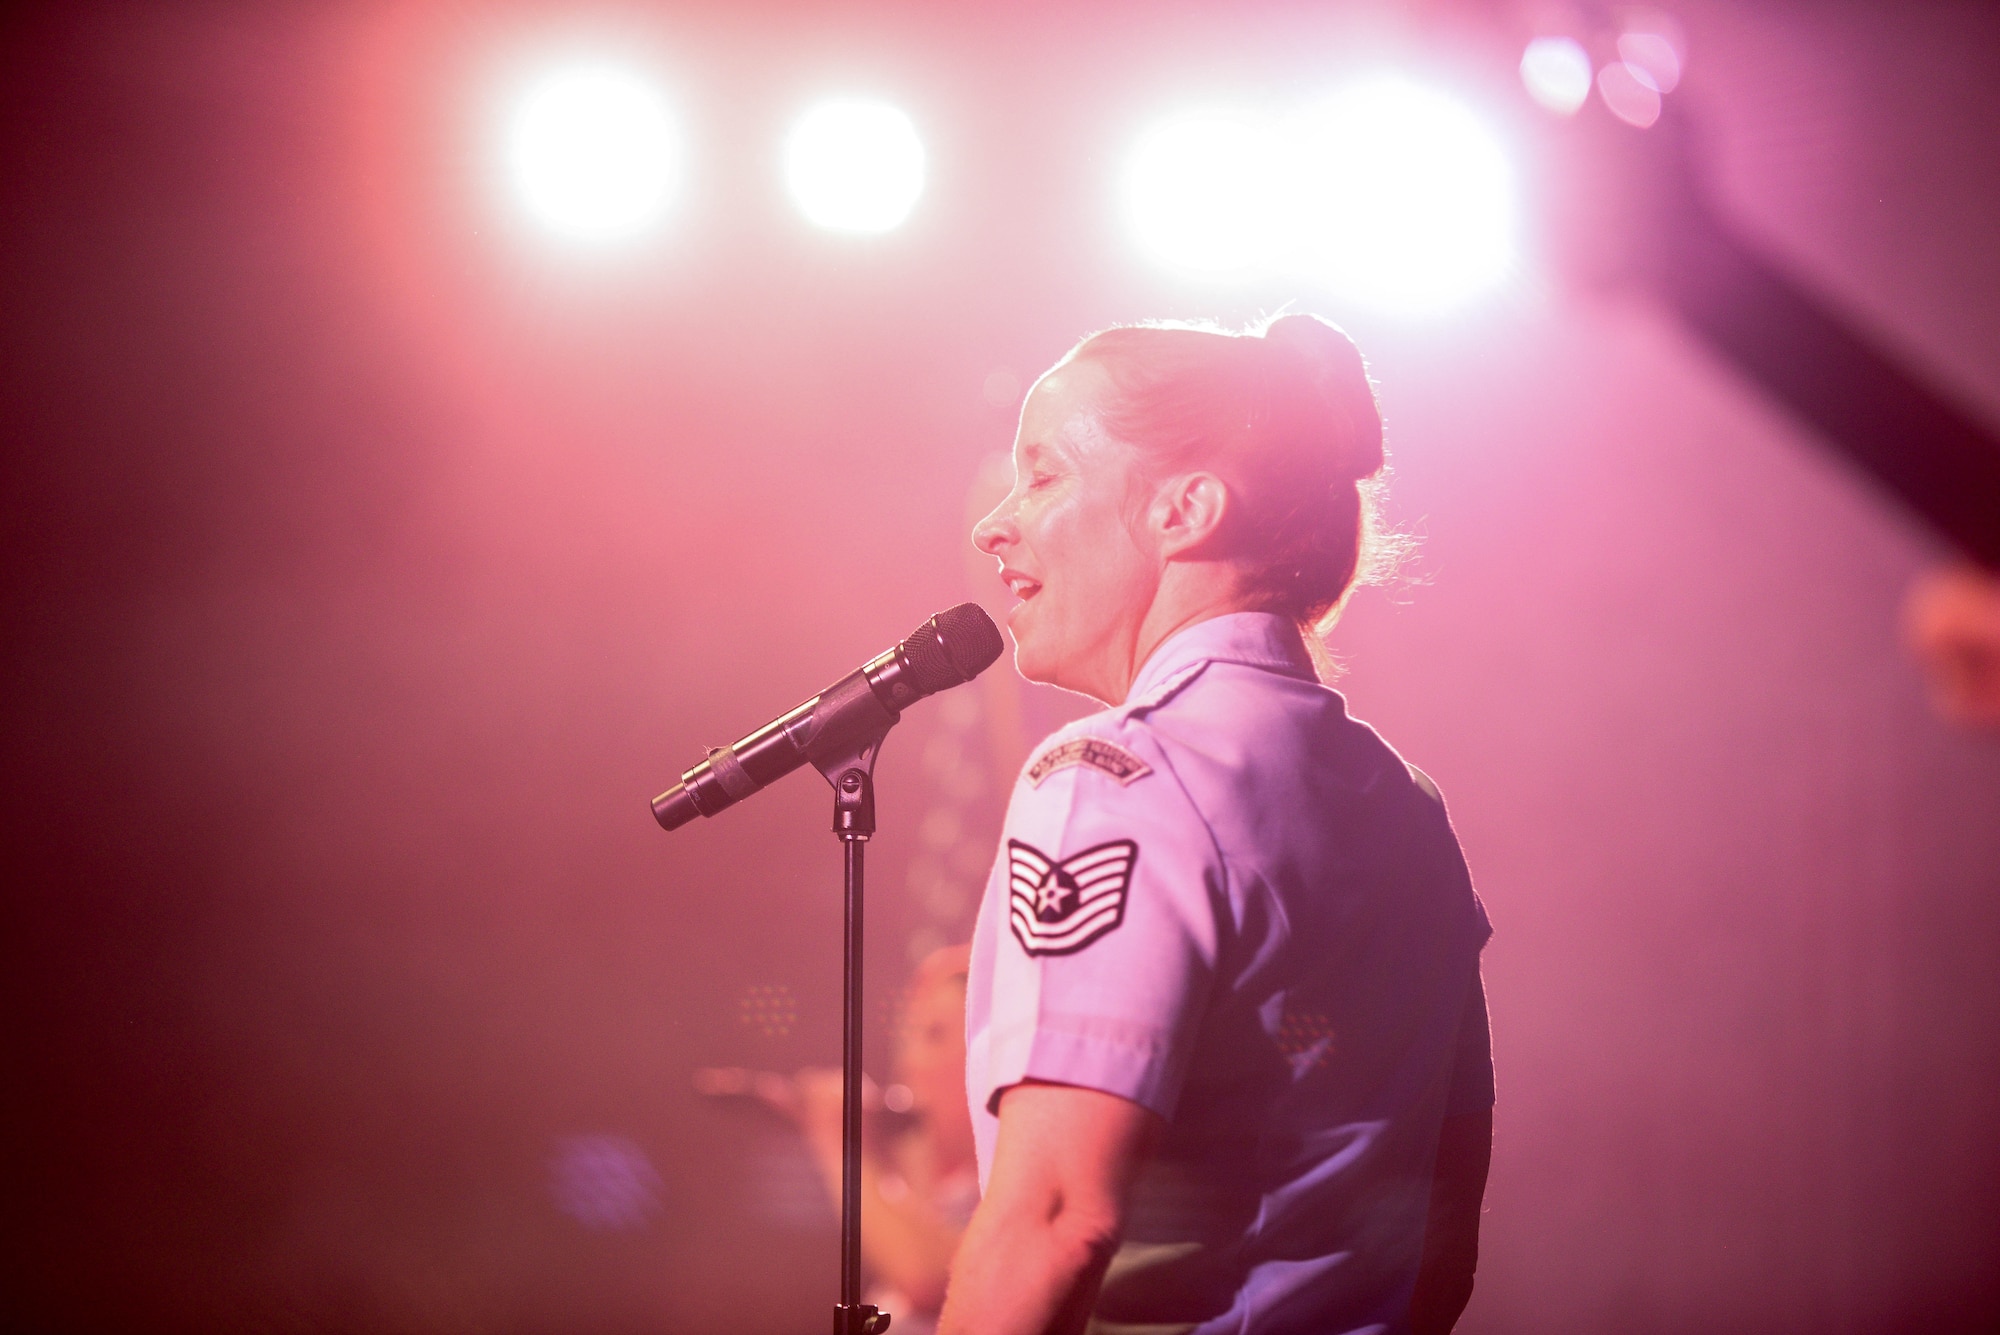 U.S. Air Force Tech. Sgt. Rebecca Packard, a vocalist with the U.S. Air Force Heartland of America Band, sings for students during a concert at Aurora Public Schools April 13, 2016, in Aurora, Neb. In addition to engaging community concerts, the band provides patriotic music and fanfares for military ceremonies, important civic events, and conducts educational clinics throughout Nebraska. (U.S. Air Force photo by Zachary Hada)